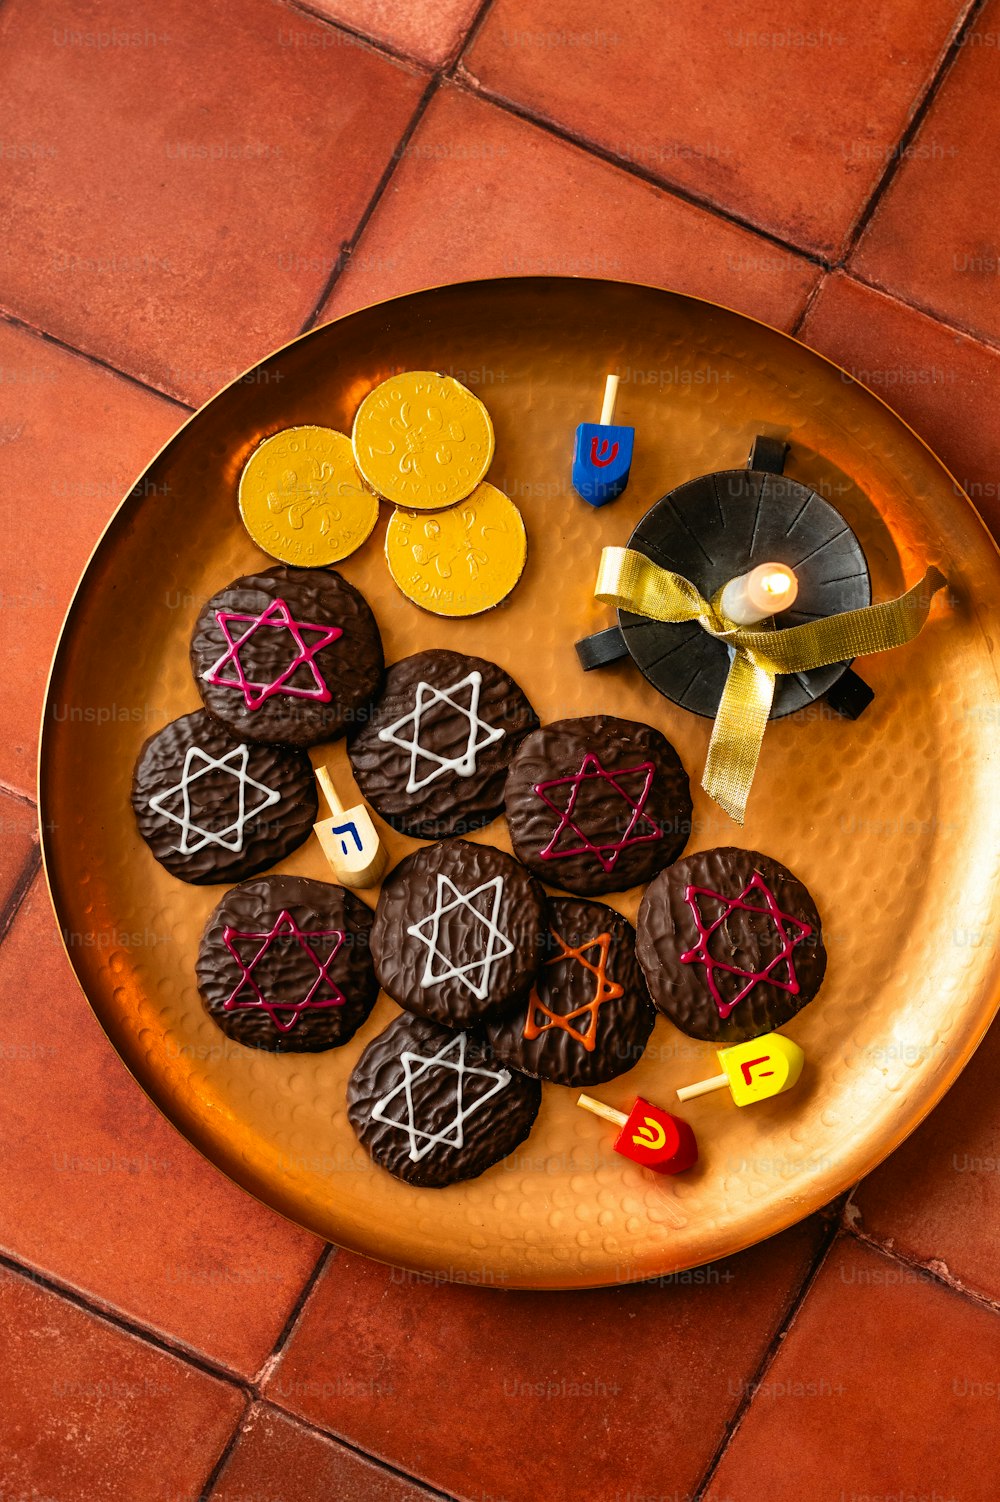 a plate of cookies decorated with letters and numbers